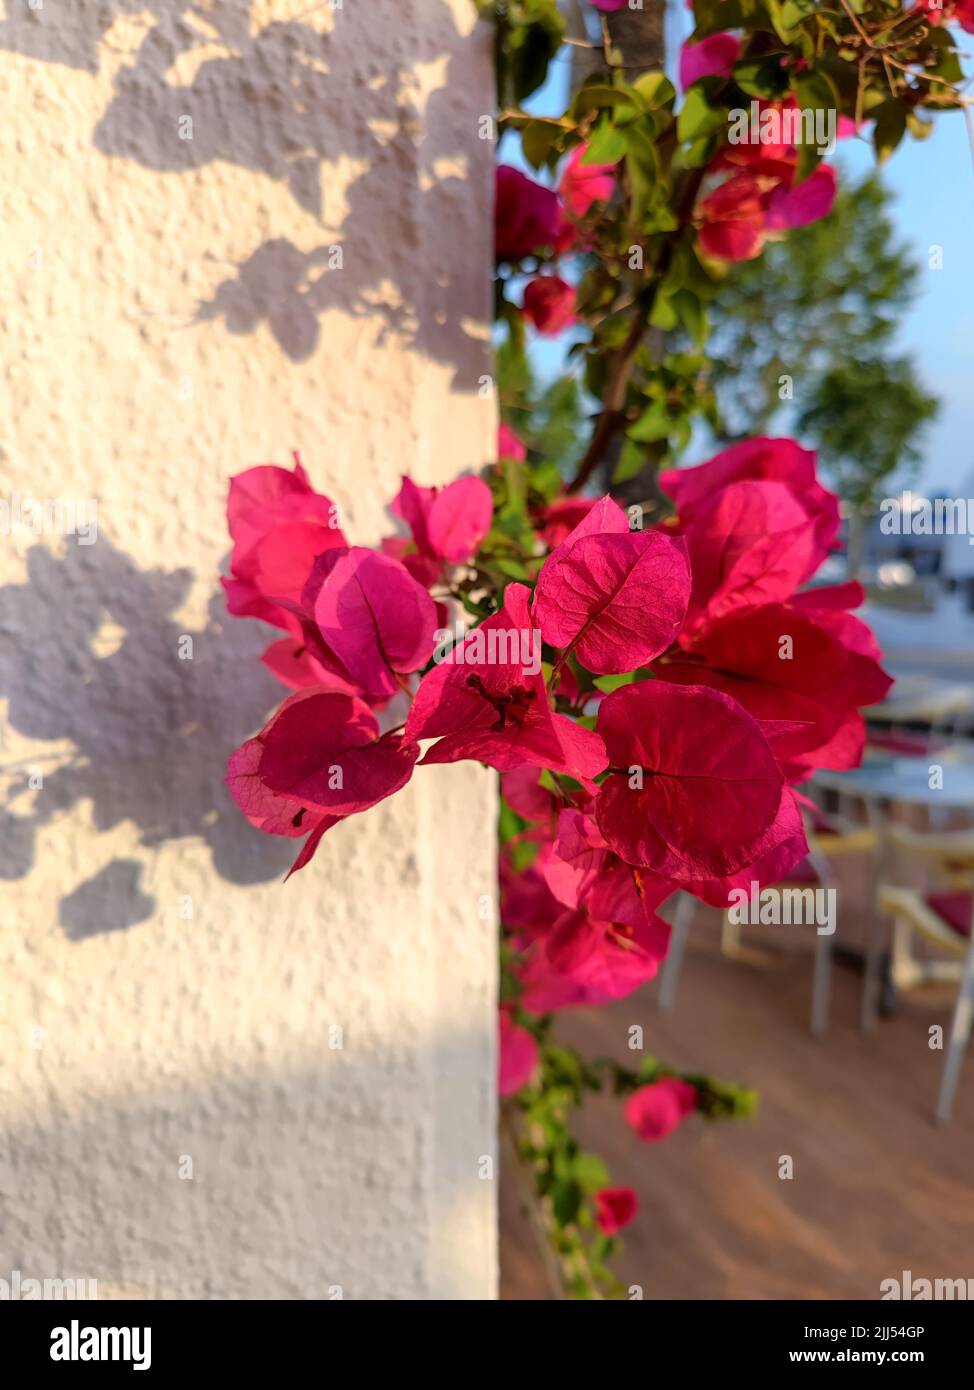 Pink Bougainvillea Glabra Nyctaginaceae flower plant in Spain, Europe. Stock Photo